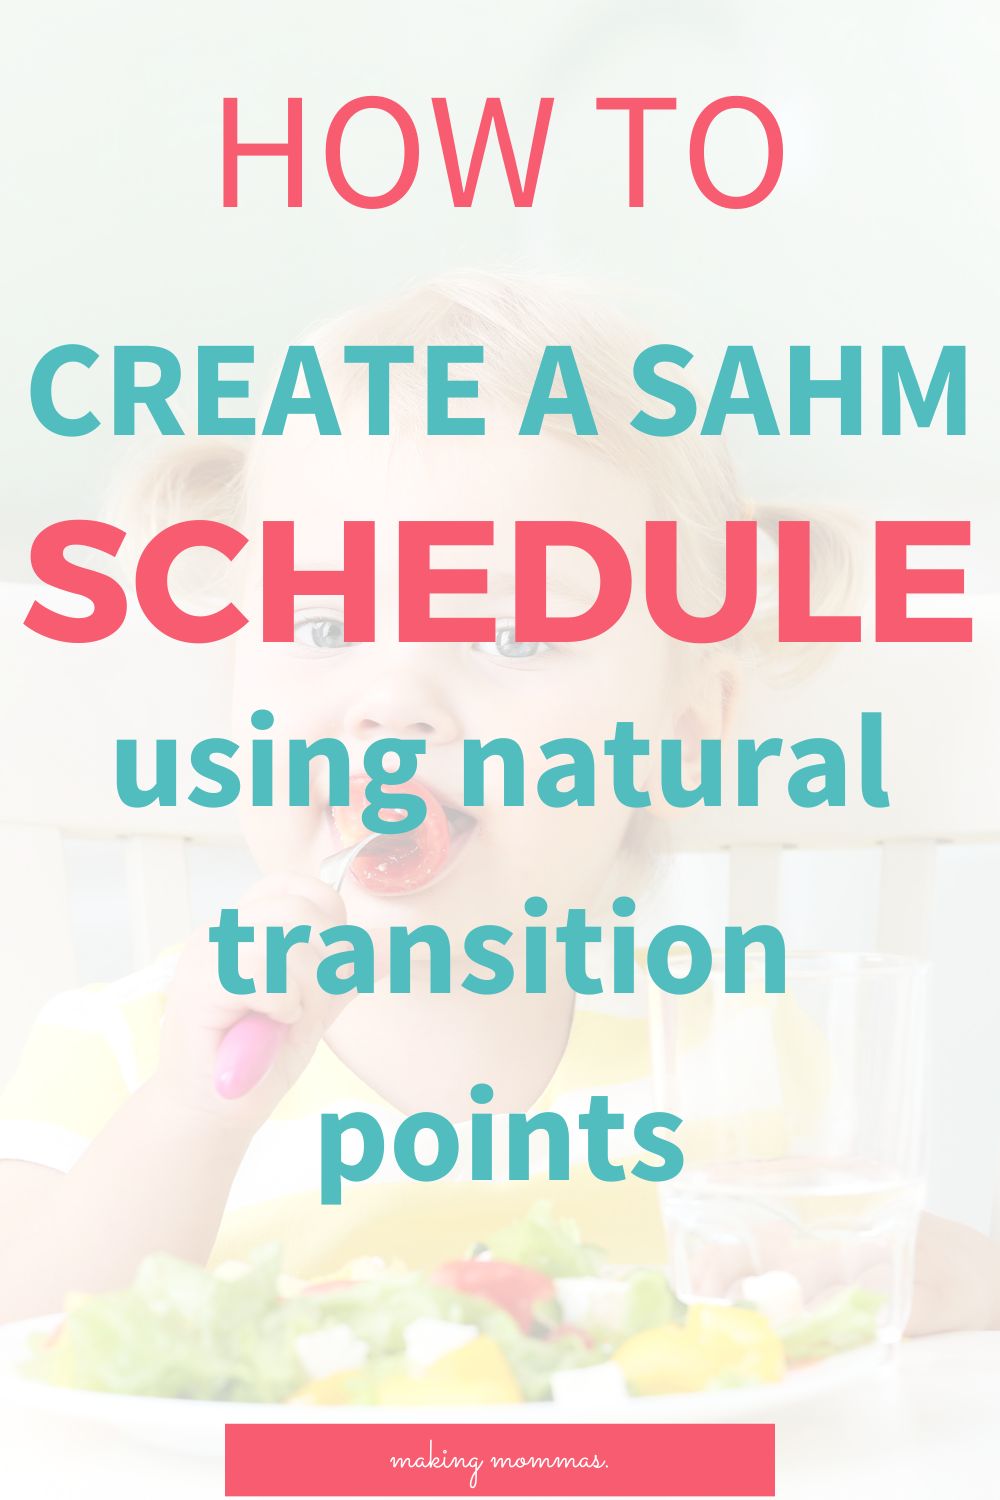 how to create a sahm schedule using natural transition points